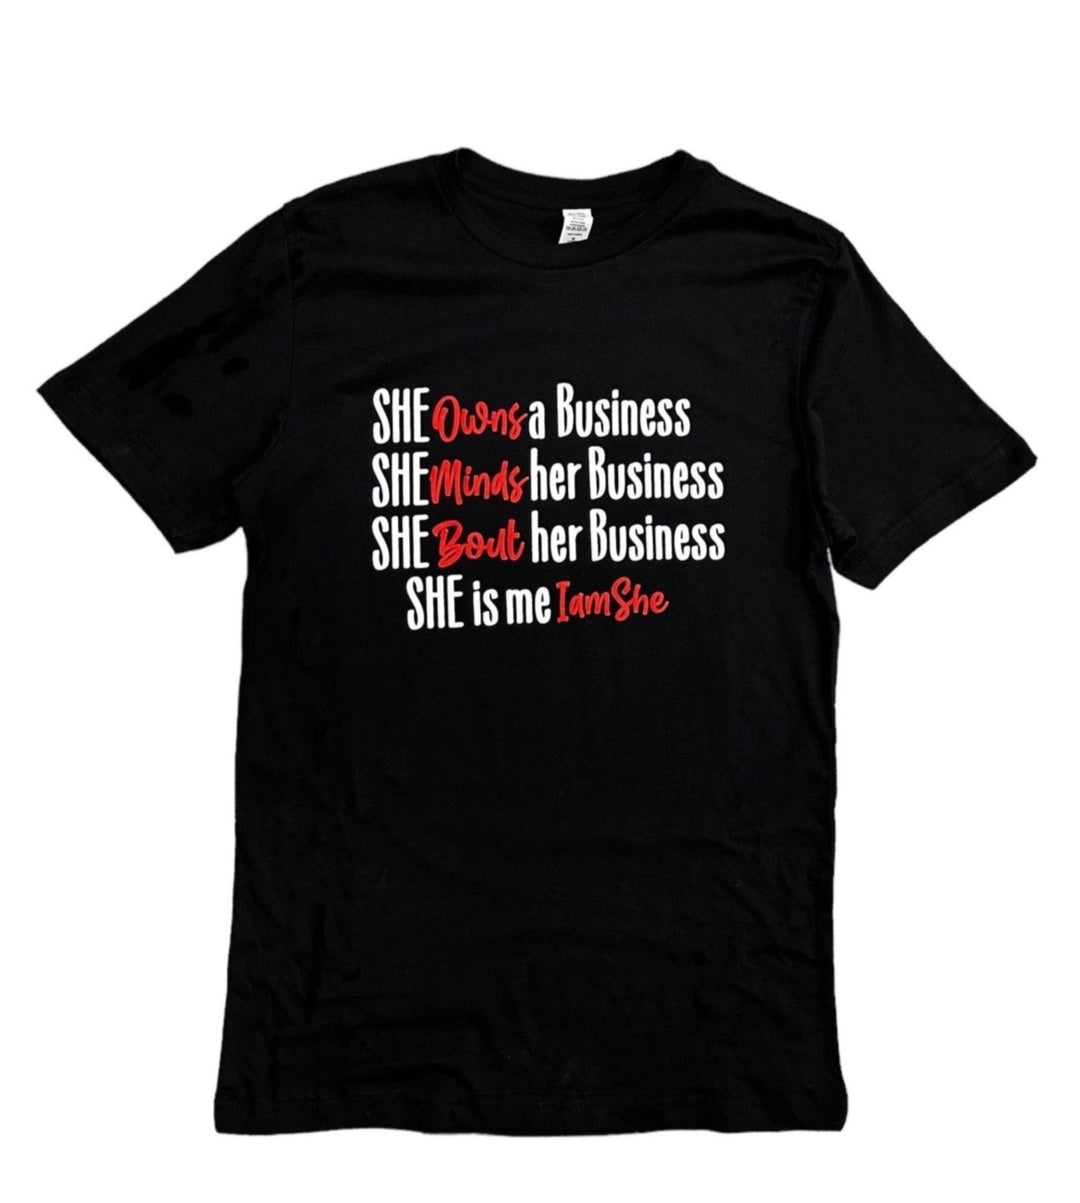 a black t - shirt that says she doesn't business she needs her business